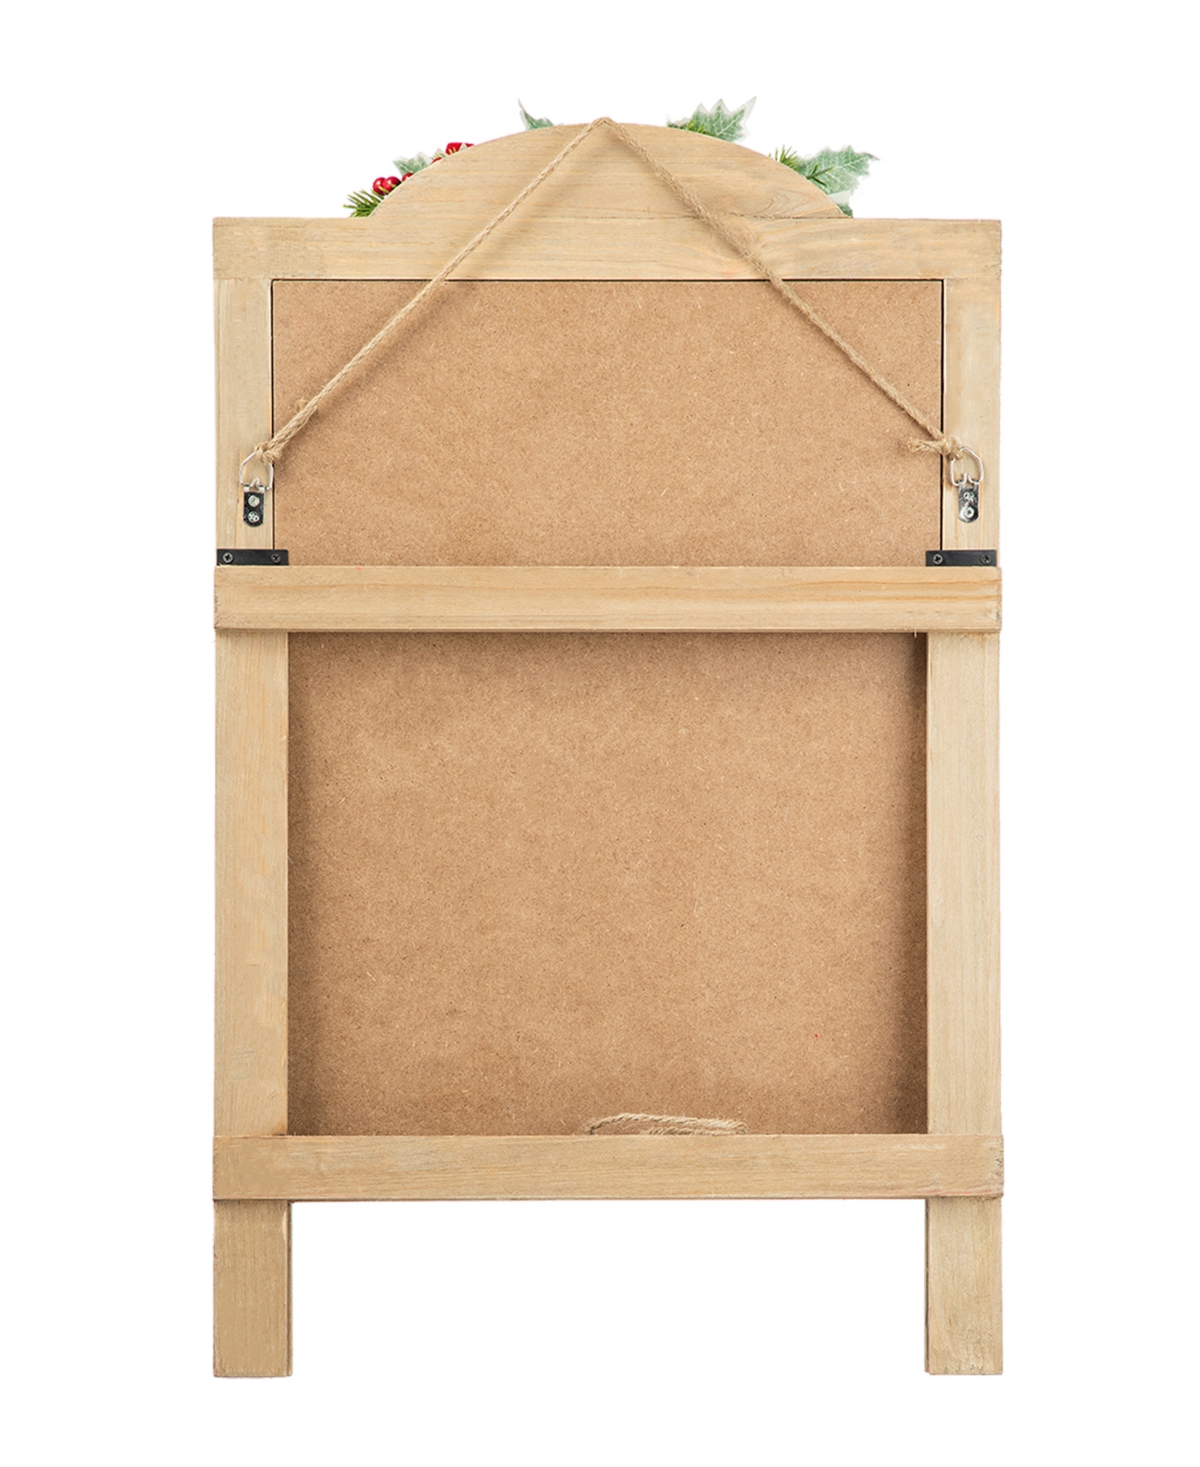 Shop Glitzhome 23.75" H Wooden "have A Holly Jolly Christmas" Easel Porch Decor In Multi